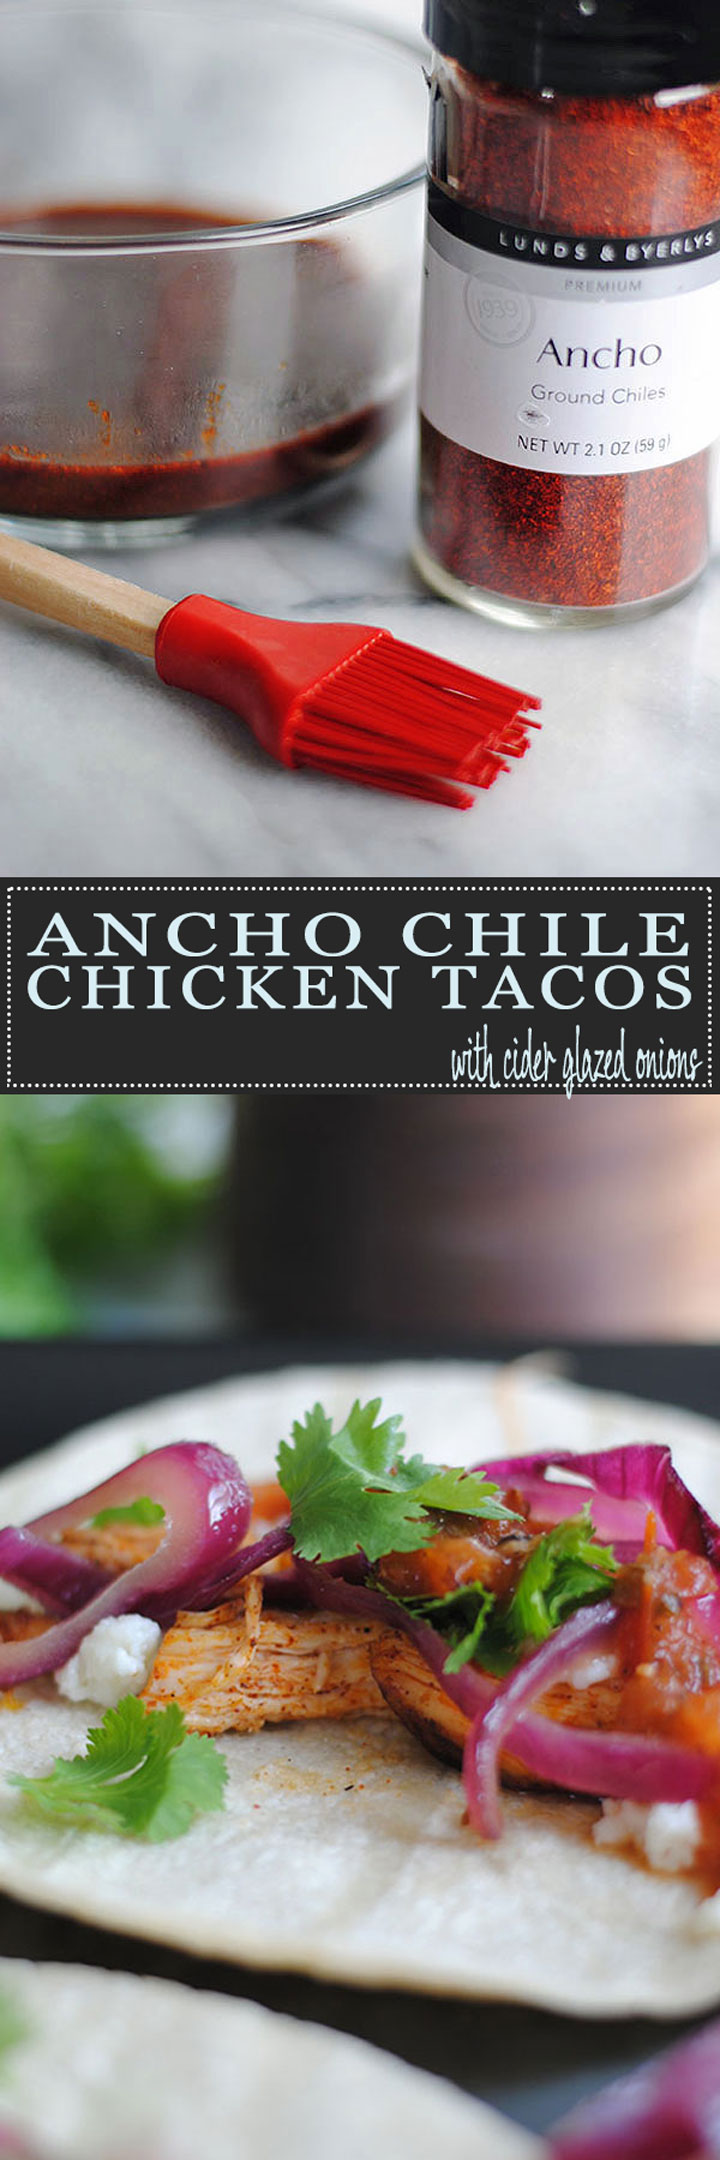 Ancho Chile Chicken Tacos with Cider Glazed Onions